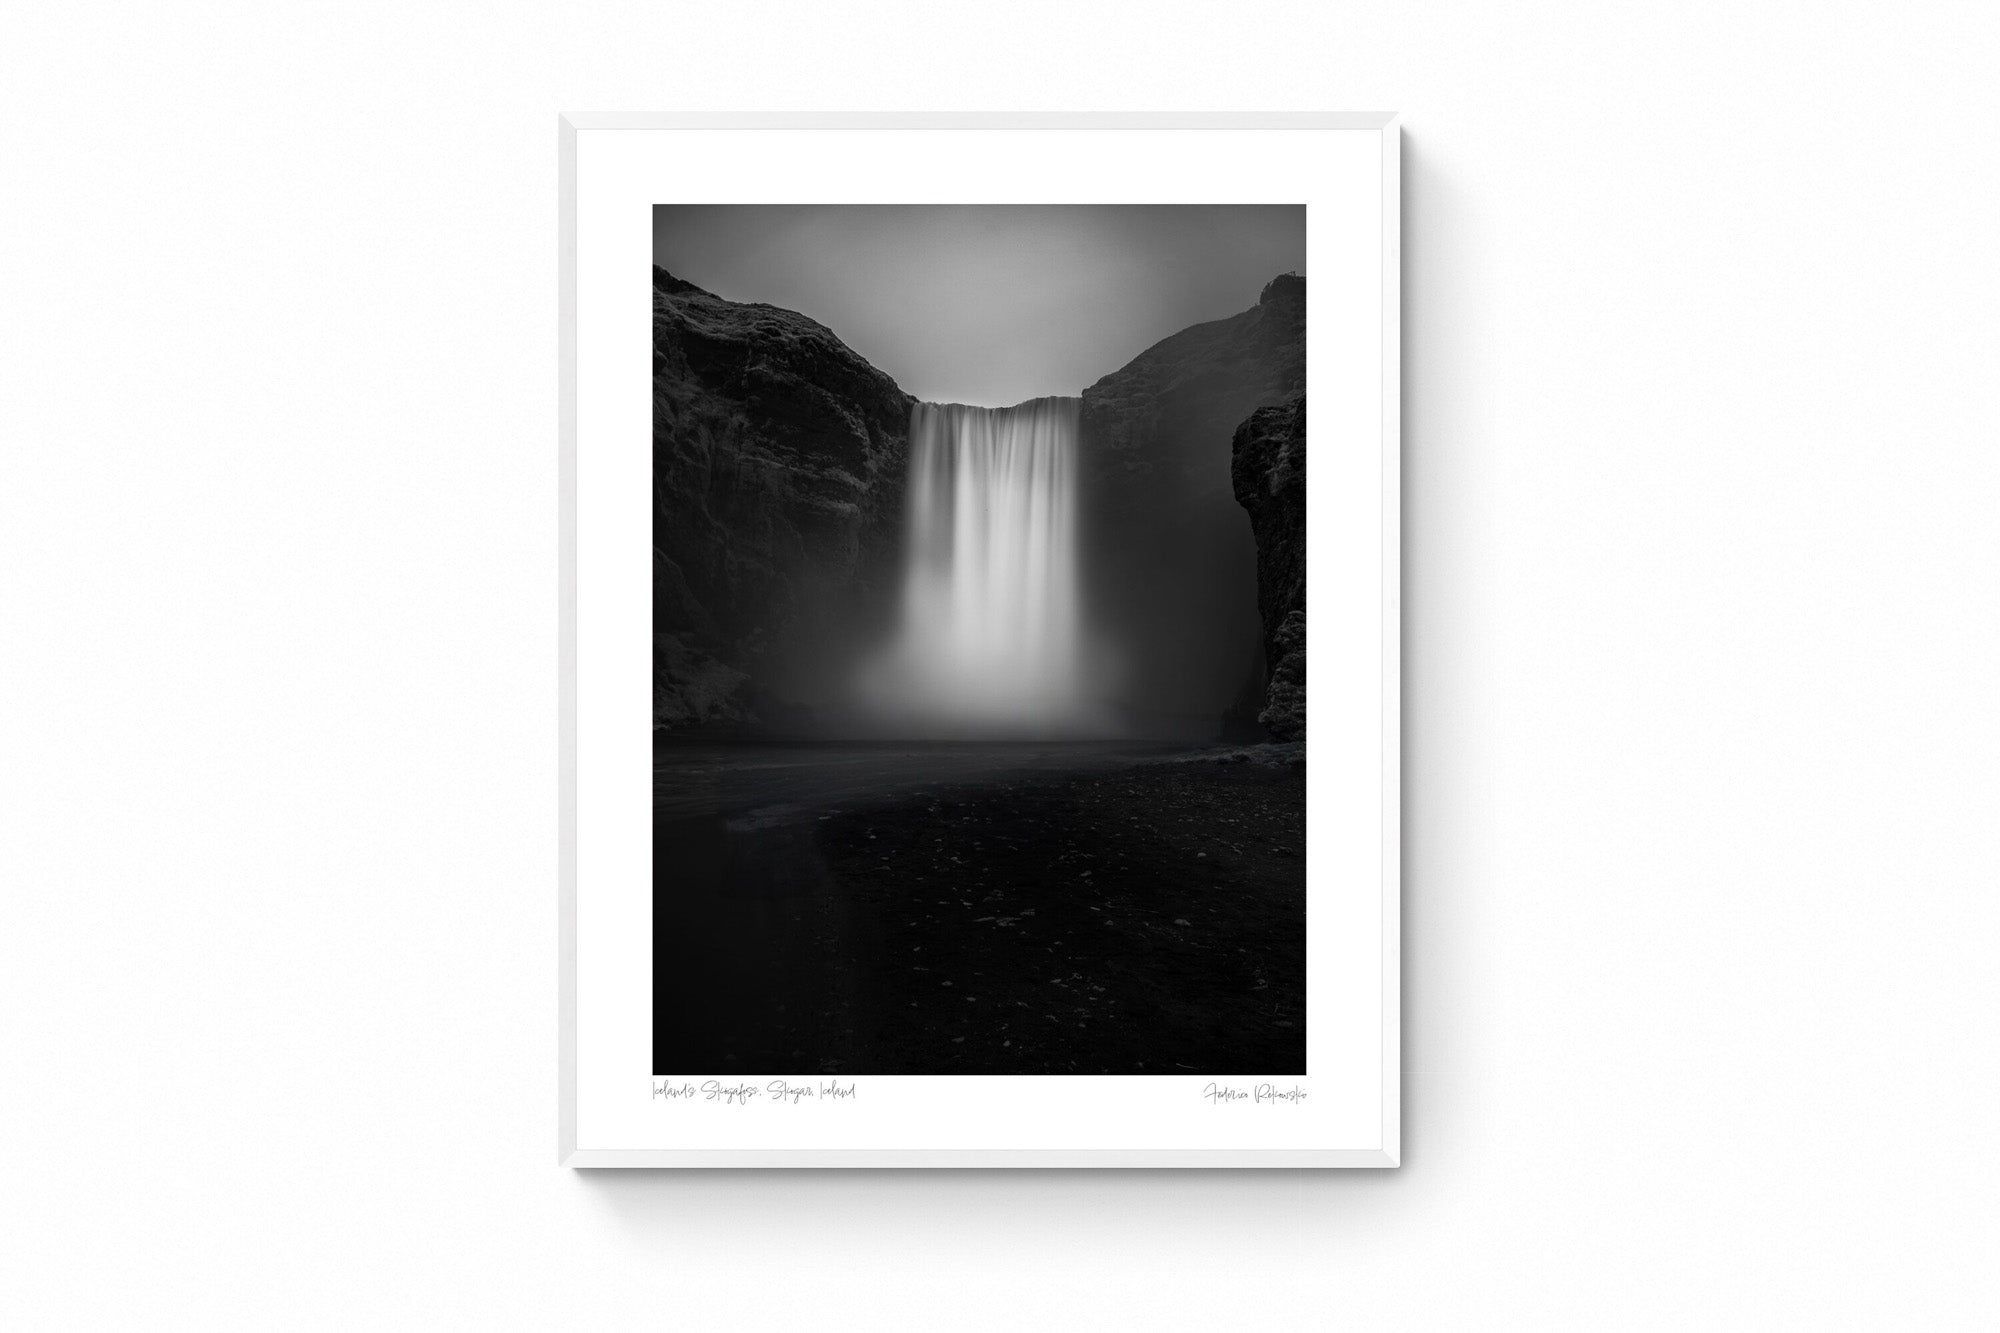 A long exposure photograph of Skógafoss waterfall in Iceland, rendered in stunning black and white, capturing the smooth flow of water between two dark cliffs.